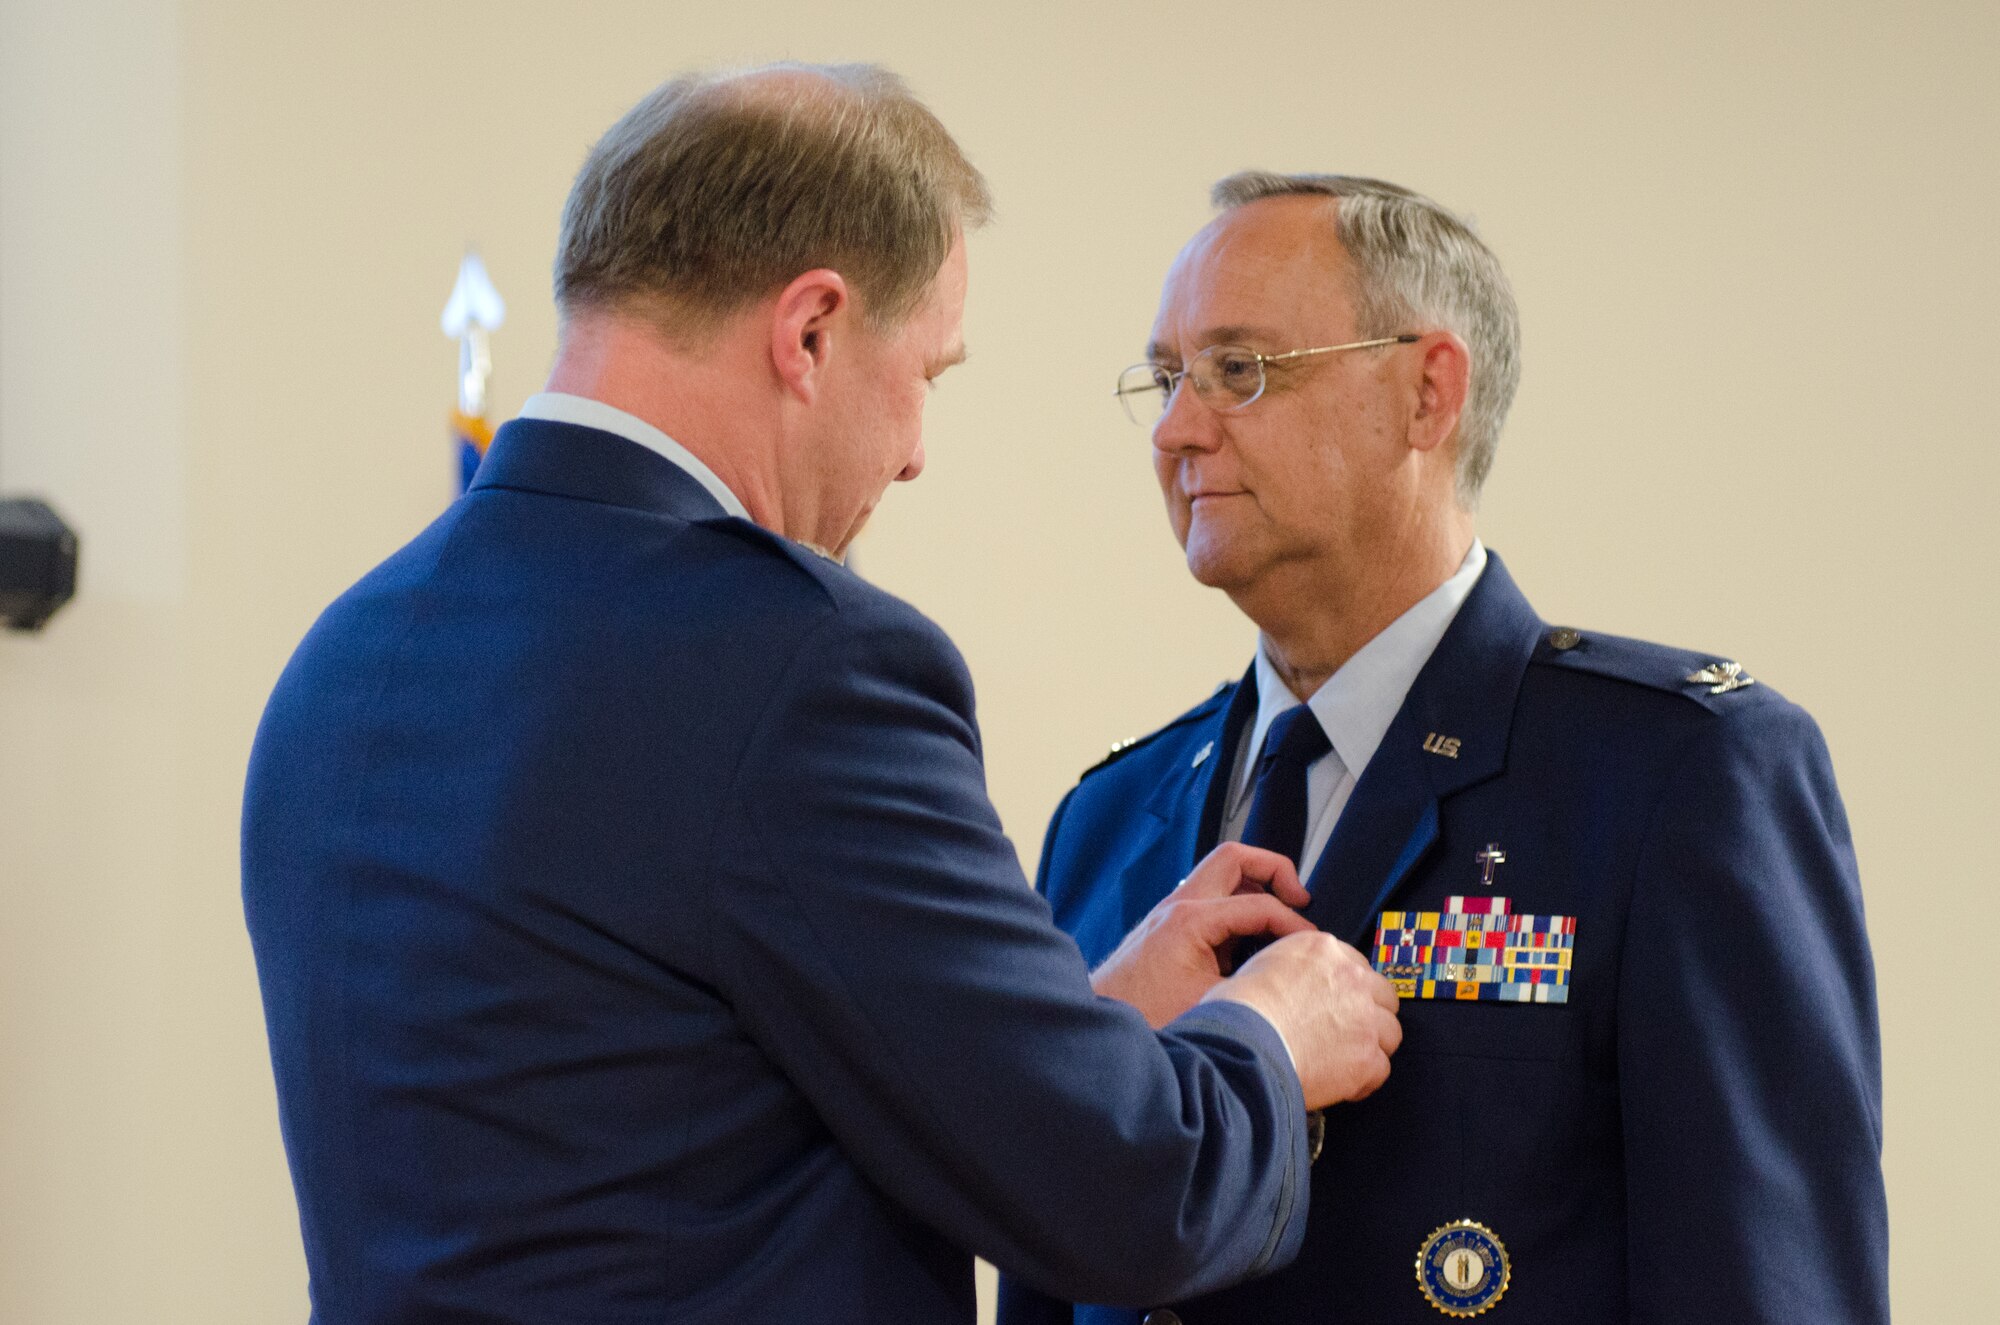 Brig. Gen. Steven P. Bullard (left), the chief of staff for Headquarters, Kentucky Air National Guard, pins Chaplain (Col.) Thomas Curry, the outgoing Air National Guard assistant to command chaplain for NORAD and USNORTHCOM, with the Defense Superior Service Medal during a ceremony at the Kentucky Air National Guard Base in Louisville, Ky. on June 6, 2015.  Curry is retiring after more than three decades of service to the Kentucky Air National Guard. (U.S. Air National Guard photo by Senior Airman Joshua Horton)